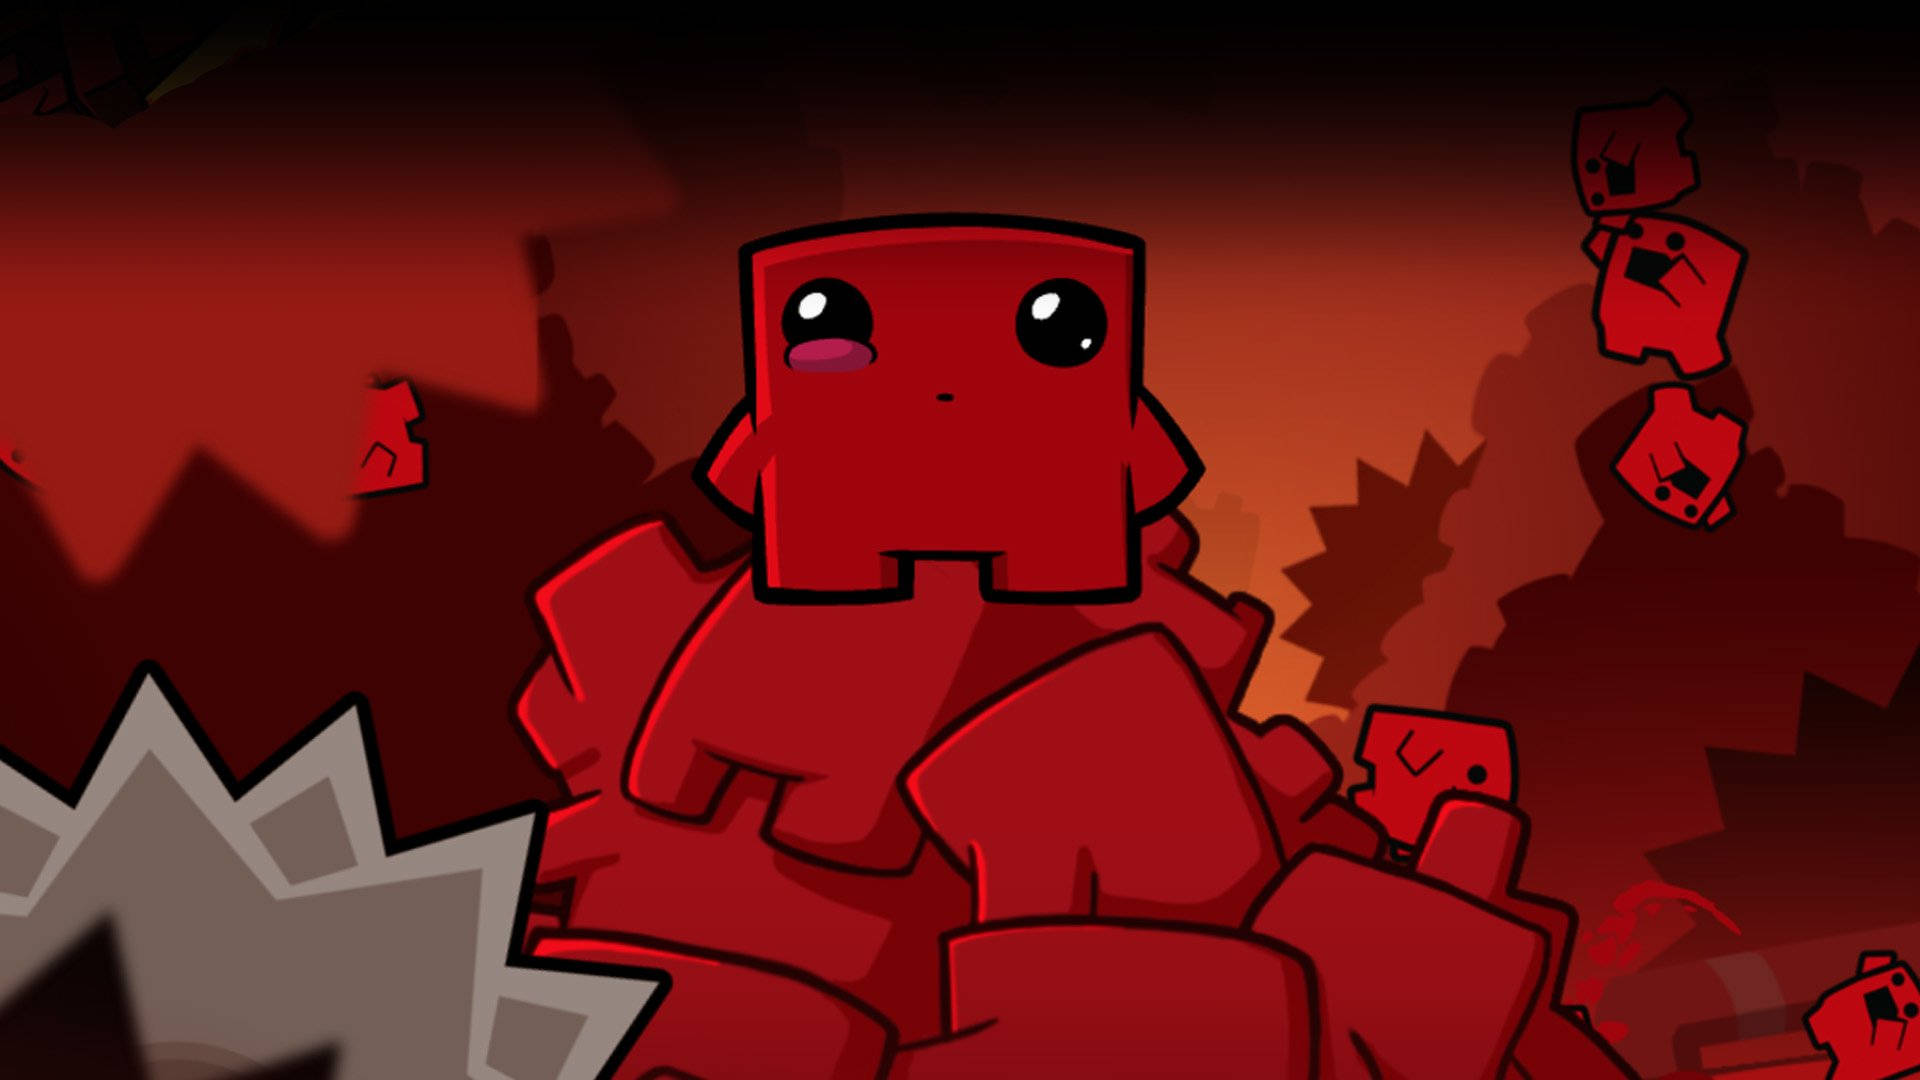 Super Meat Boy On Red Cubes Wallpaper